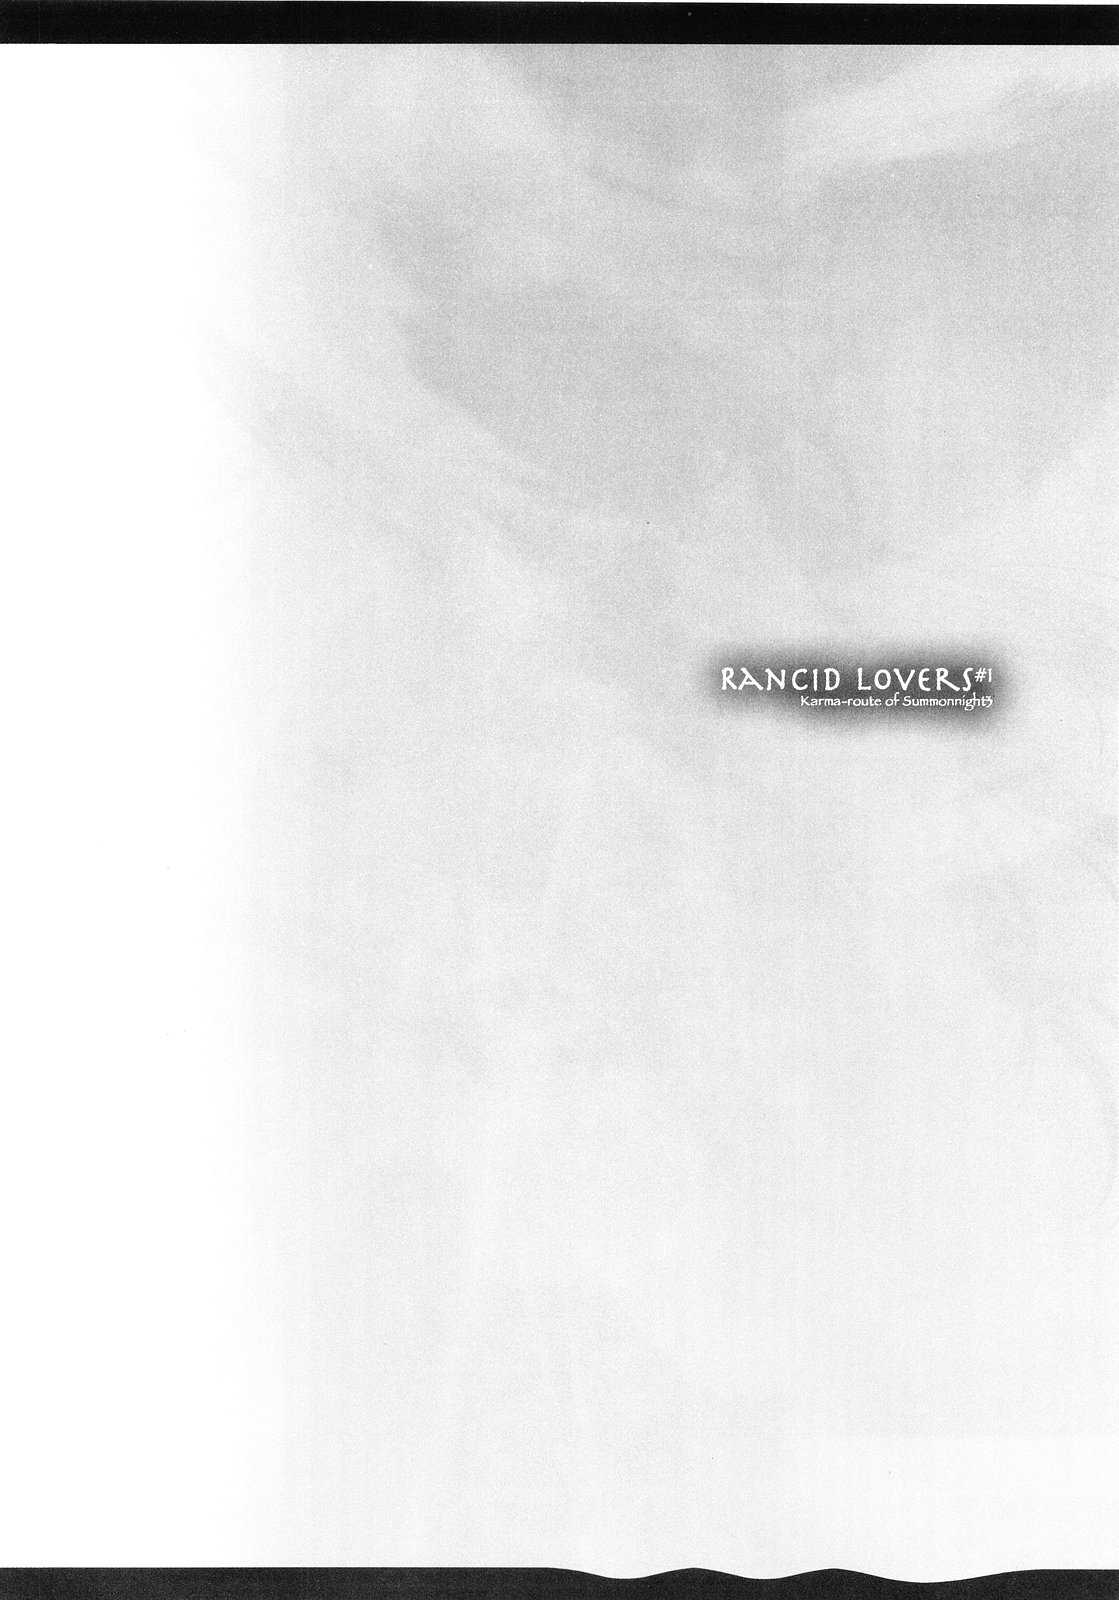 [Synthetic Garden (miwa miwa)]  RANCID LOVERS #1 (alternate scan, contains full cover image) 